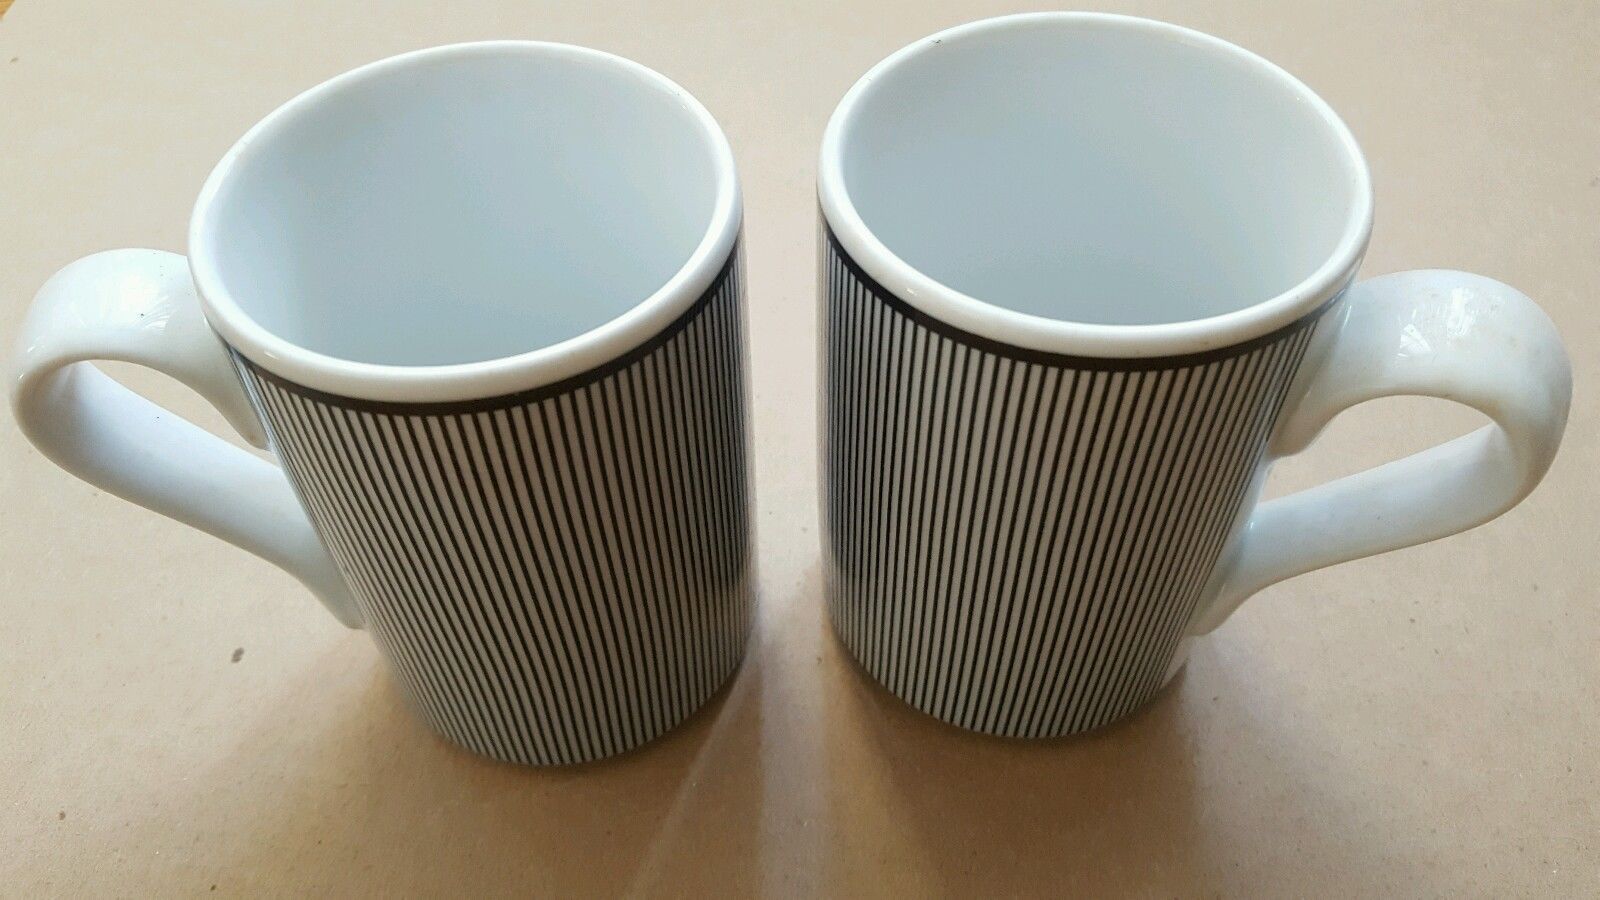 DANSK Bistro Collection Ringsted Blue White stripes Set of 2 mugs cups Pinstripe - $8.86